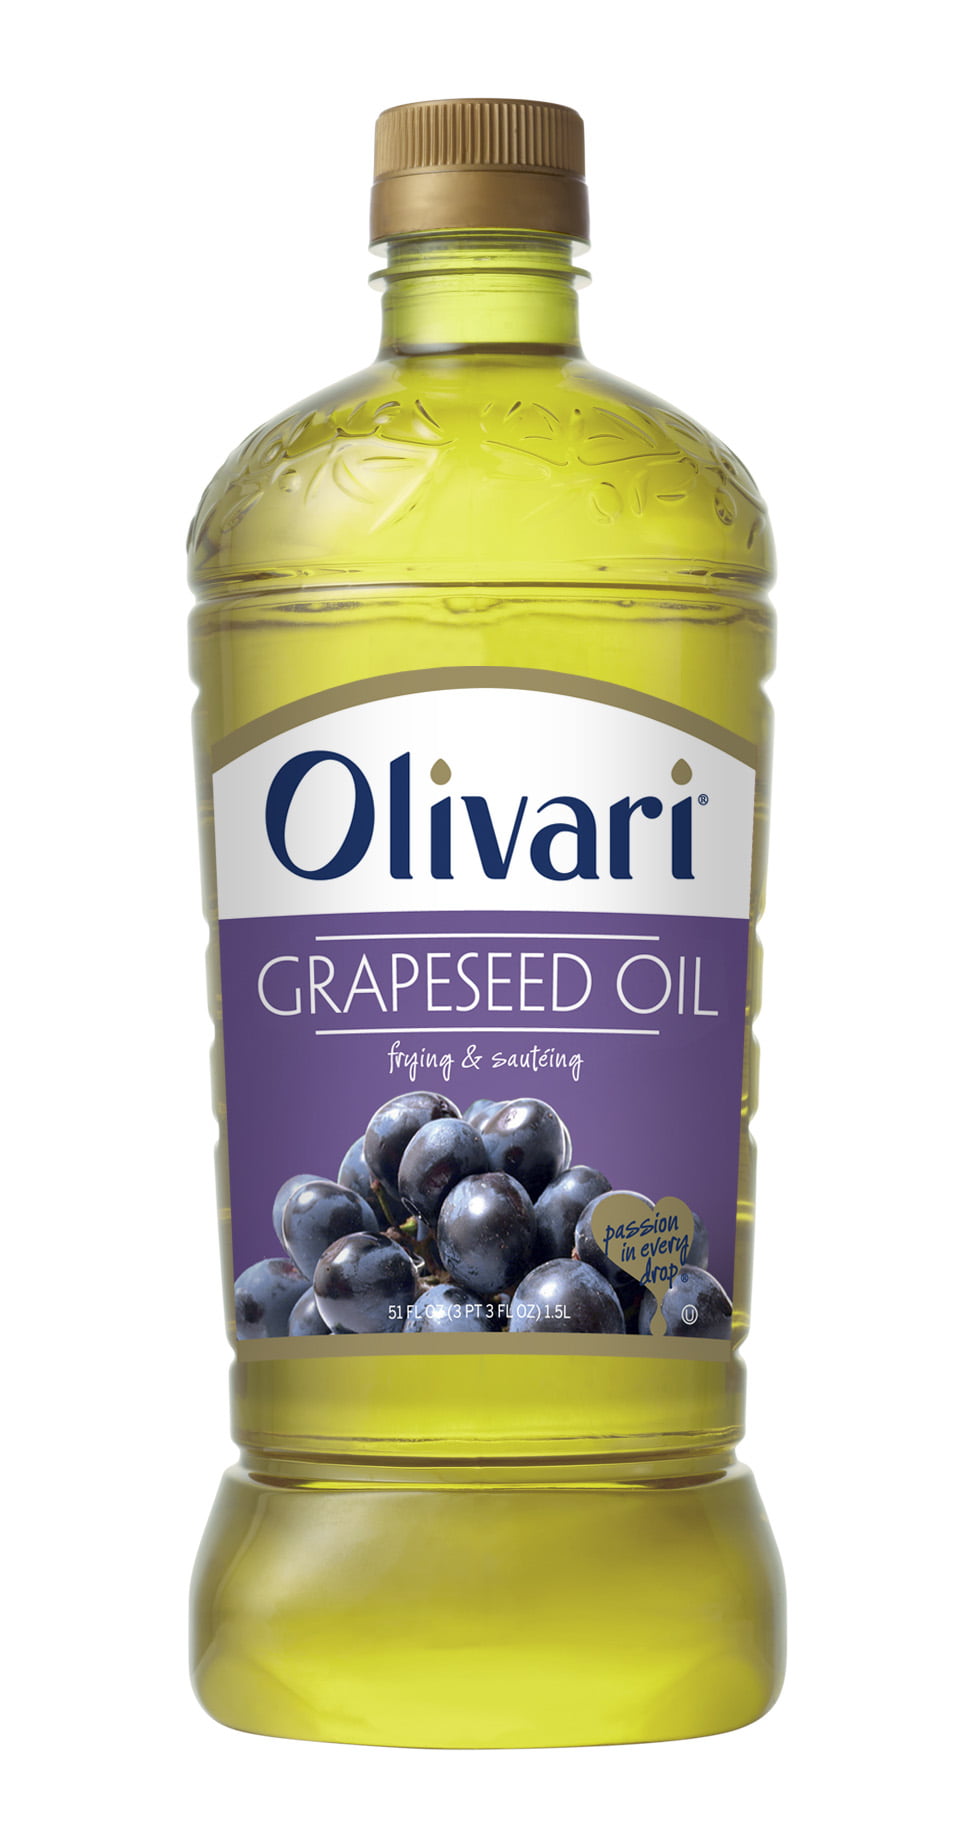 “Discover the Economic Advantages of Grapeseed Oil: A Budget-Friendly, Versatile, and Sustainable Choice!”